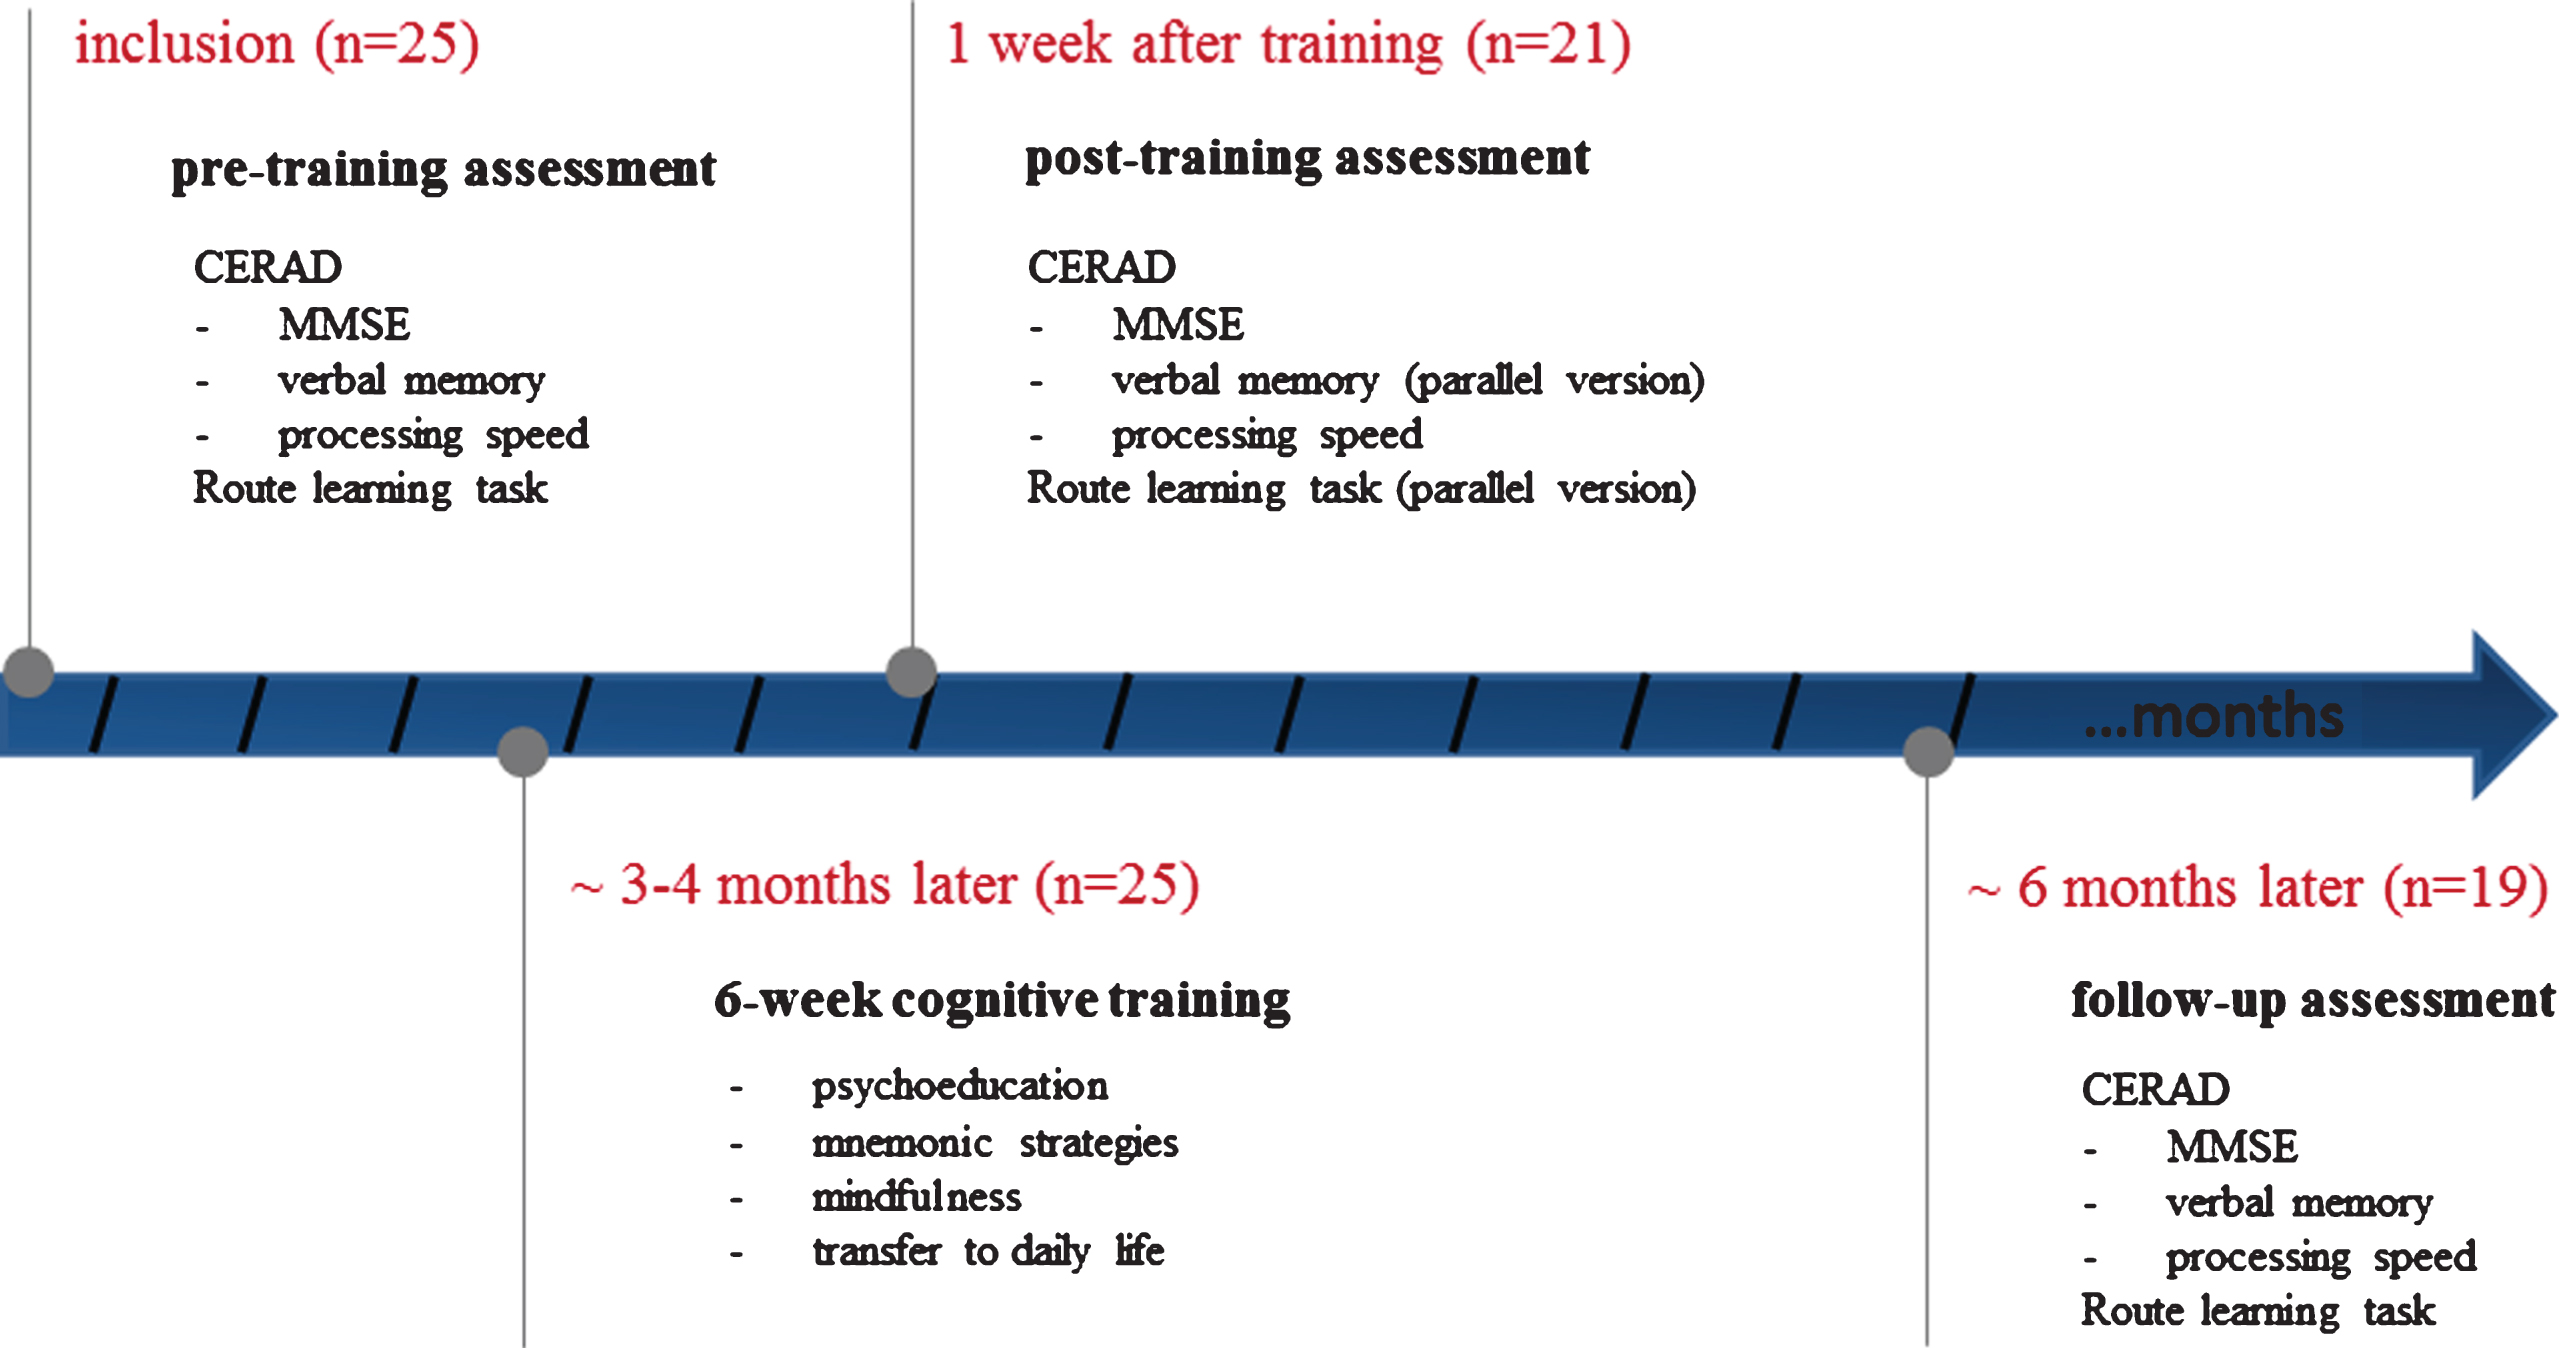 Schematic of study procedure for patients with mild cognitive impairment receiving 6 weekly sessions of cognitive intervention and neuropsychological assessment at pre-training, post-training and follow-up. CERAD, Consortium to Establish a Registry of Alzheimer’s disease; MMSE, Mini-Mental Status Examination.